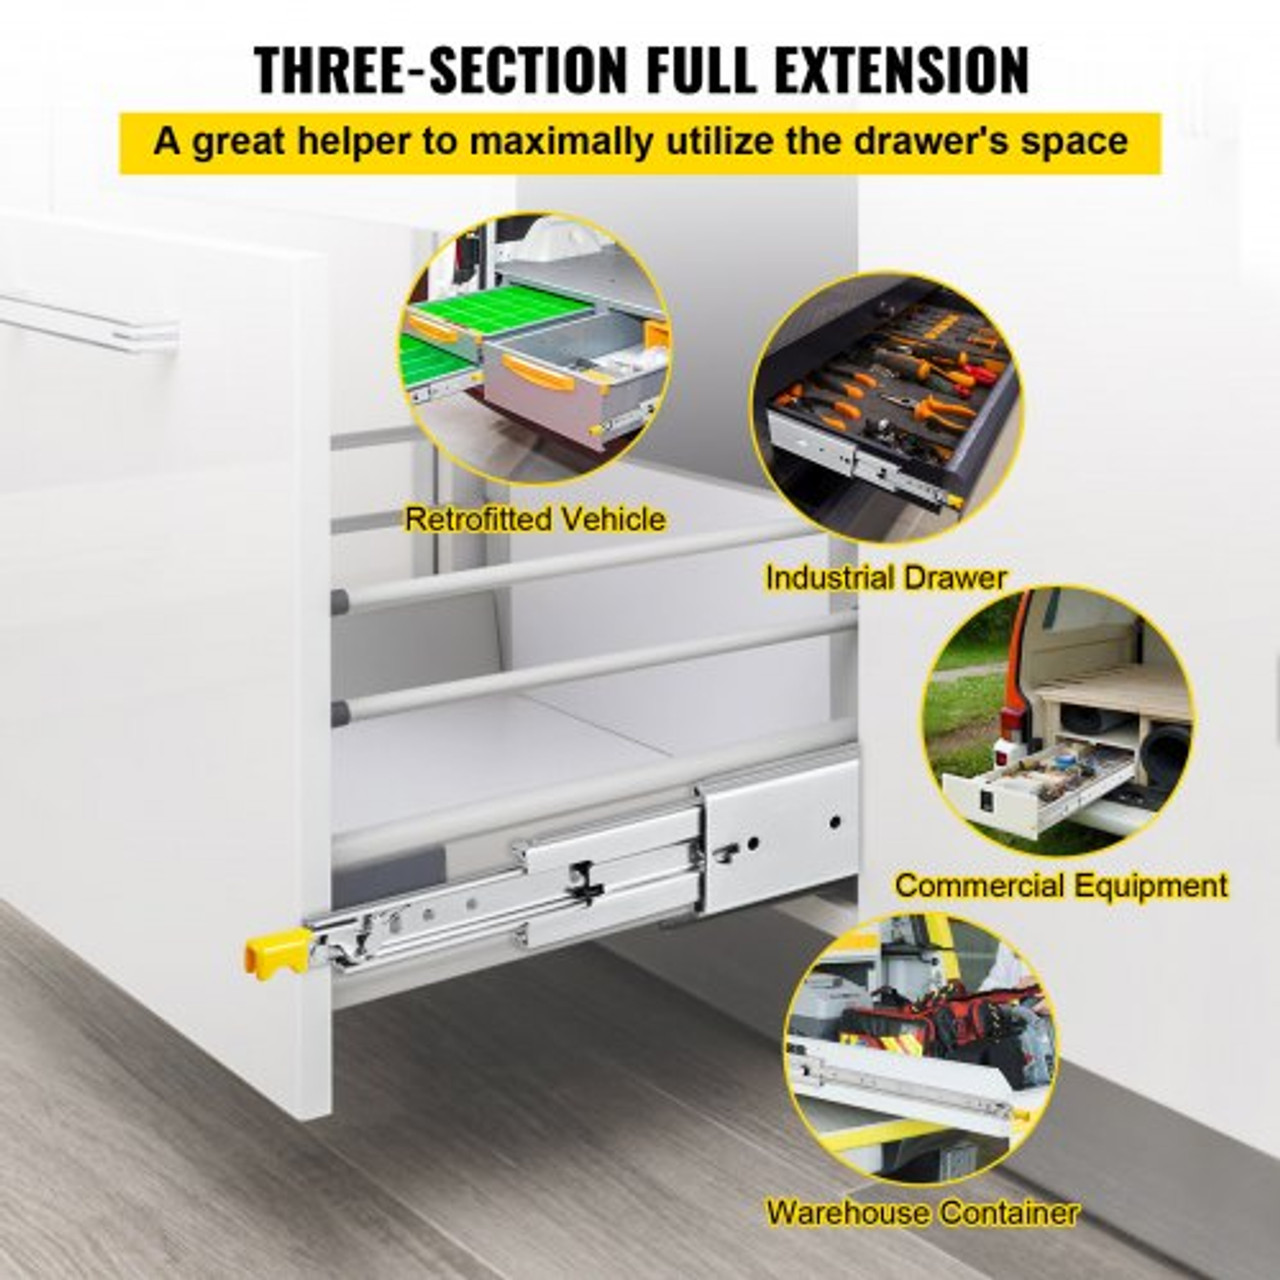 Drawer Slides with Lock, 1 Pair 30 inch, Heavy-Duty Industrial Steel up to 500 lbs Capacity, 3-Fold Full Extension, Ball Bearing Lock-in & Lock-Out, Side Mount